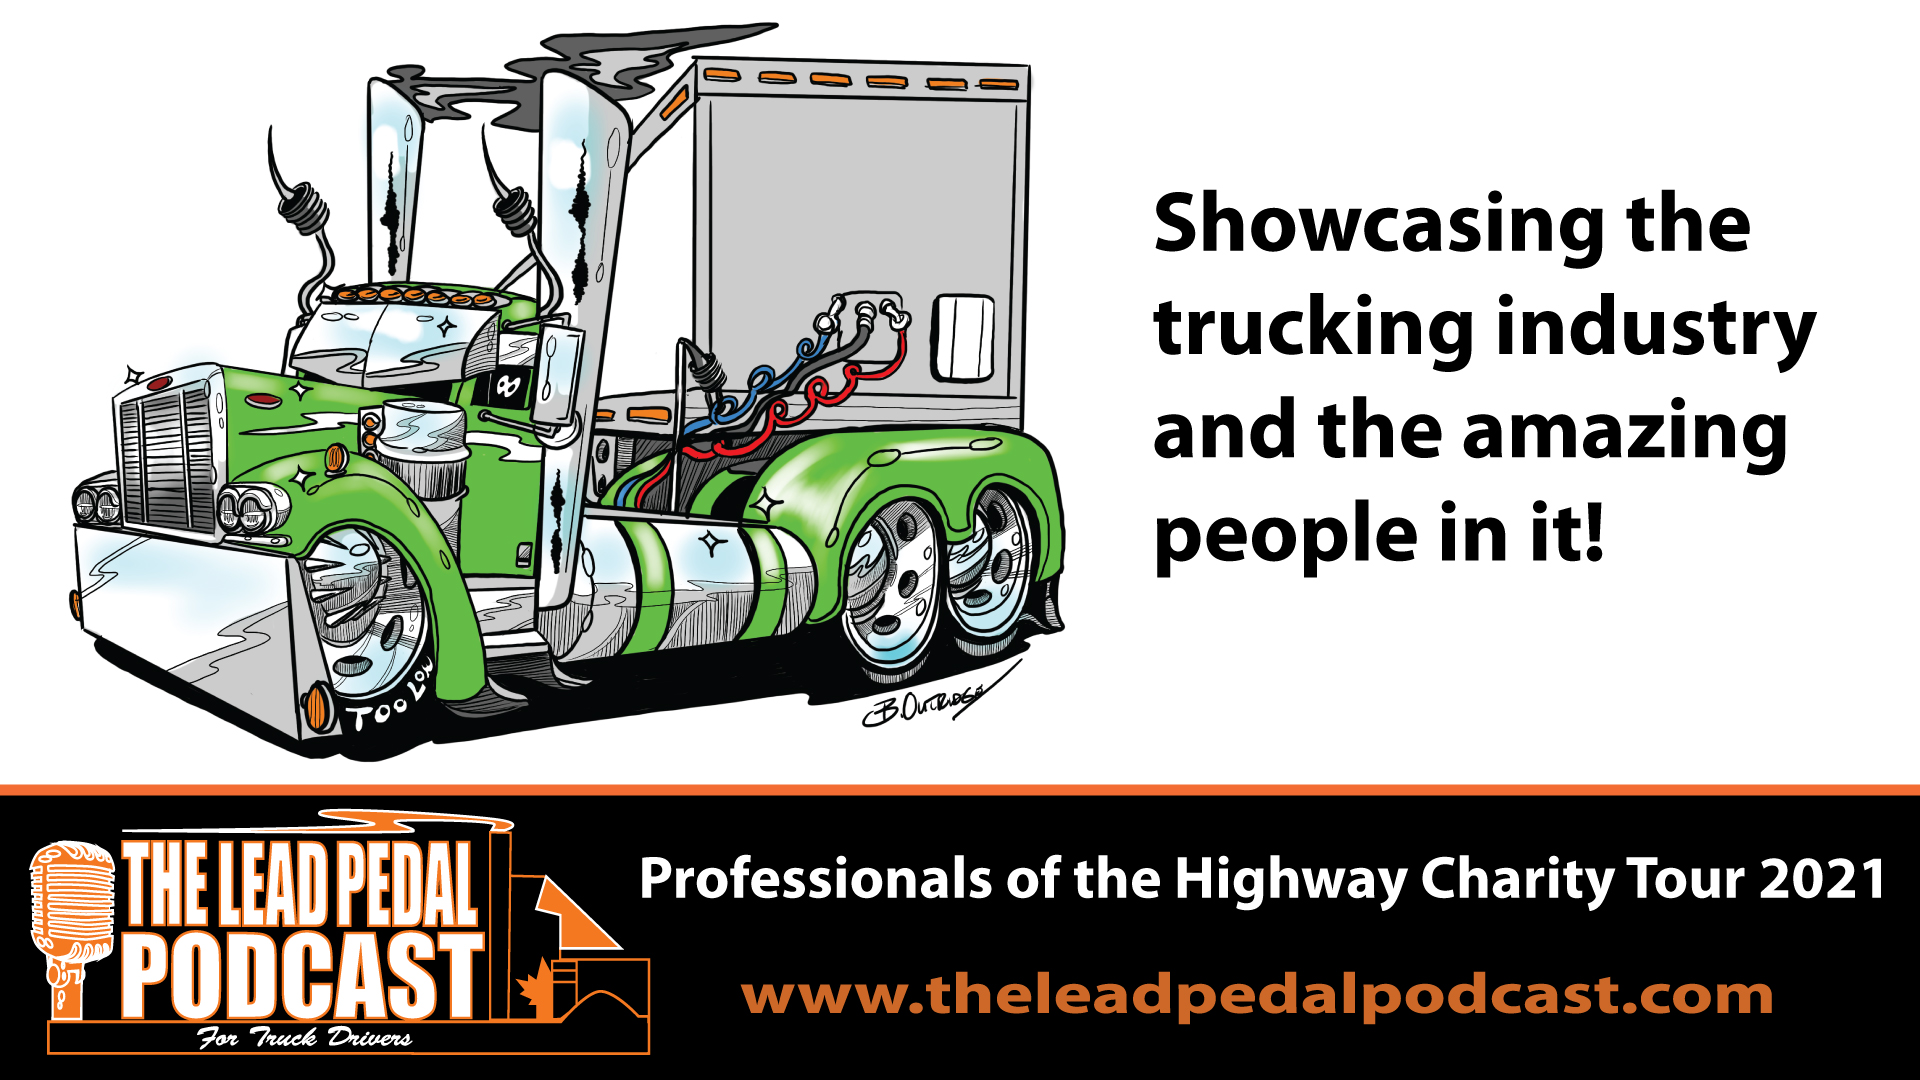 The Professionals of the Highway Charity Tour Visited Western Ontario.